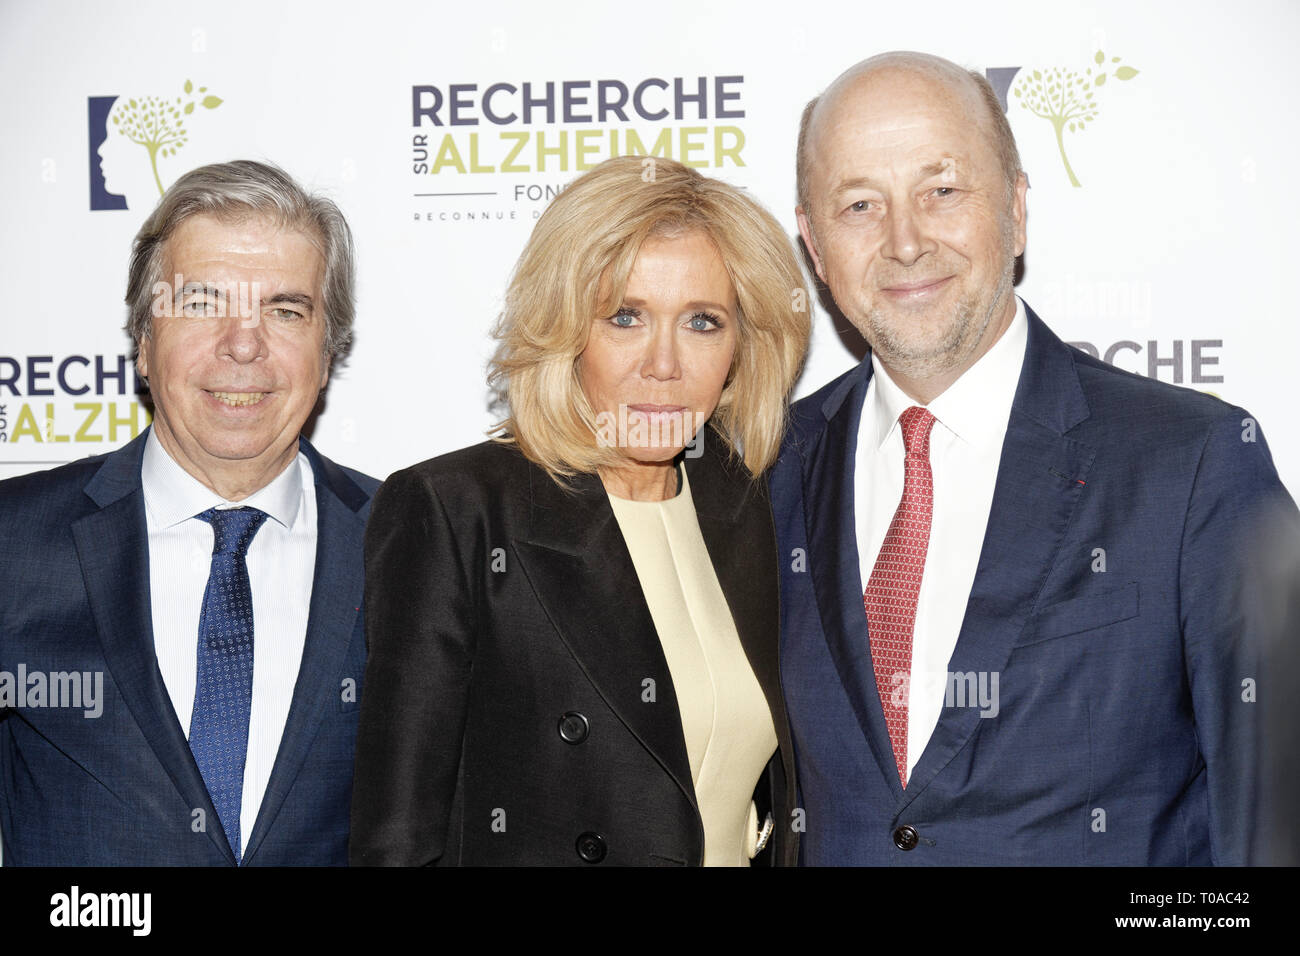 Paris, France. 18th Mar 2019. Pr Bruno Dubois, Brigitte Macron and Olivier De Ladoucette ( R) - Photocall of the 14th Gala 2019 of the Association for Alzheimer Research at the Olympia in Paris on March 18, 2019 Credit: Véronique PHITOUSSI/Alamy Live News Stock Photo